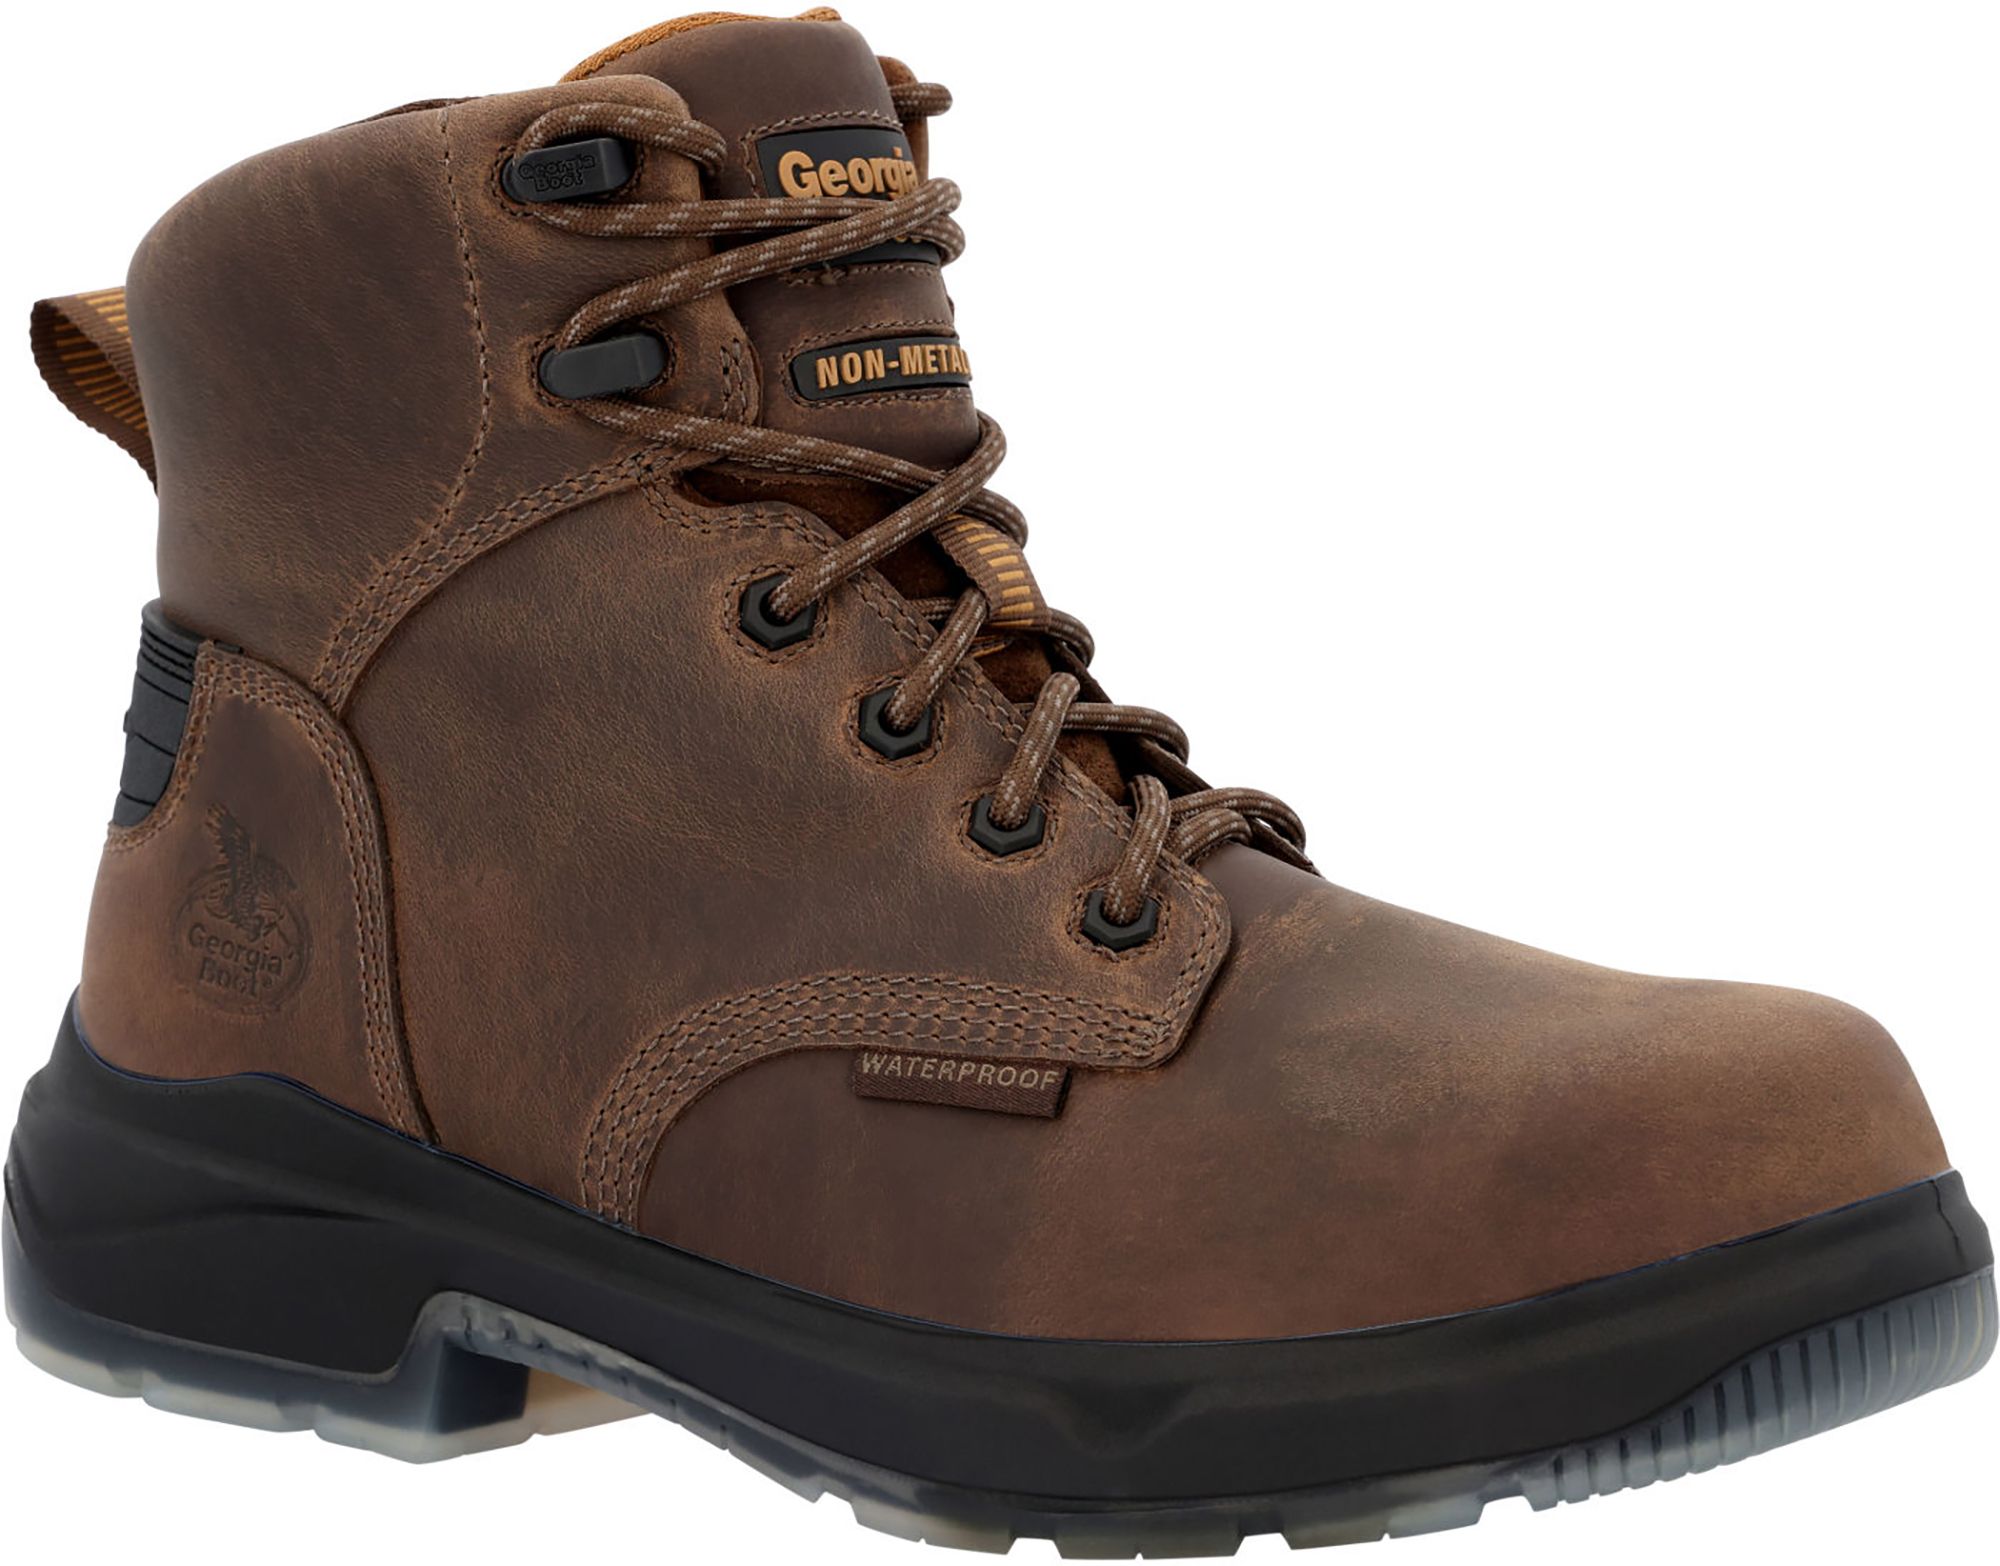 Georgia Boots Men's FLXPoint ULTRA Composite Toe Waterproof Work Boots